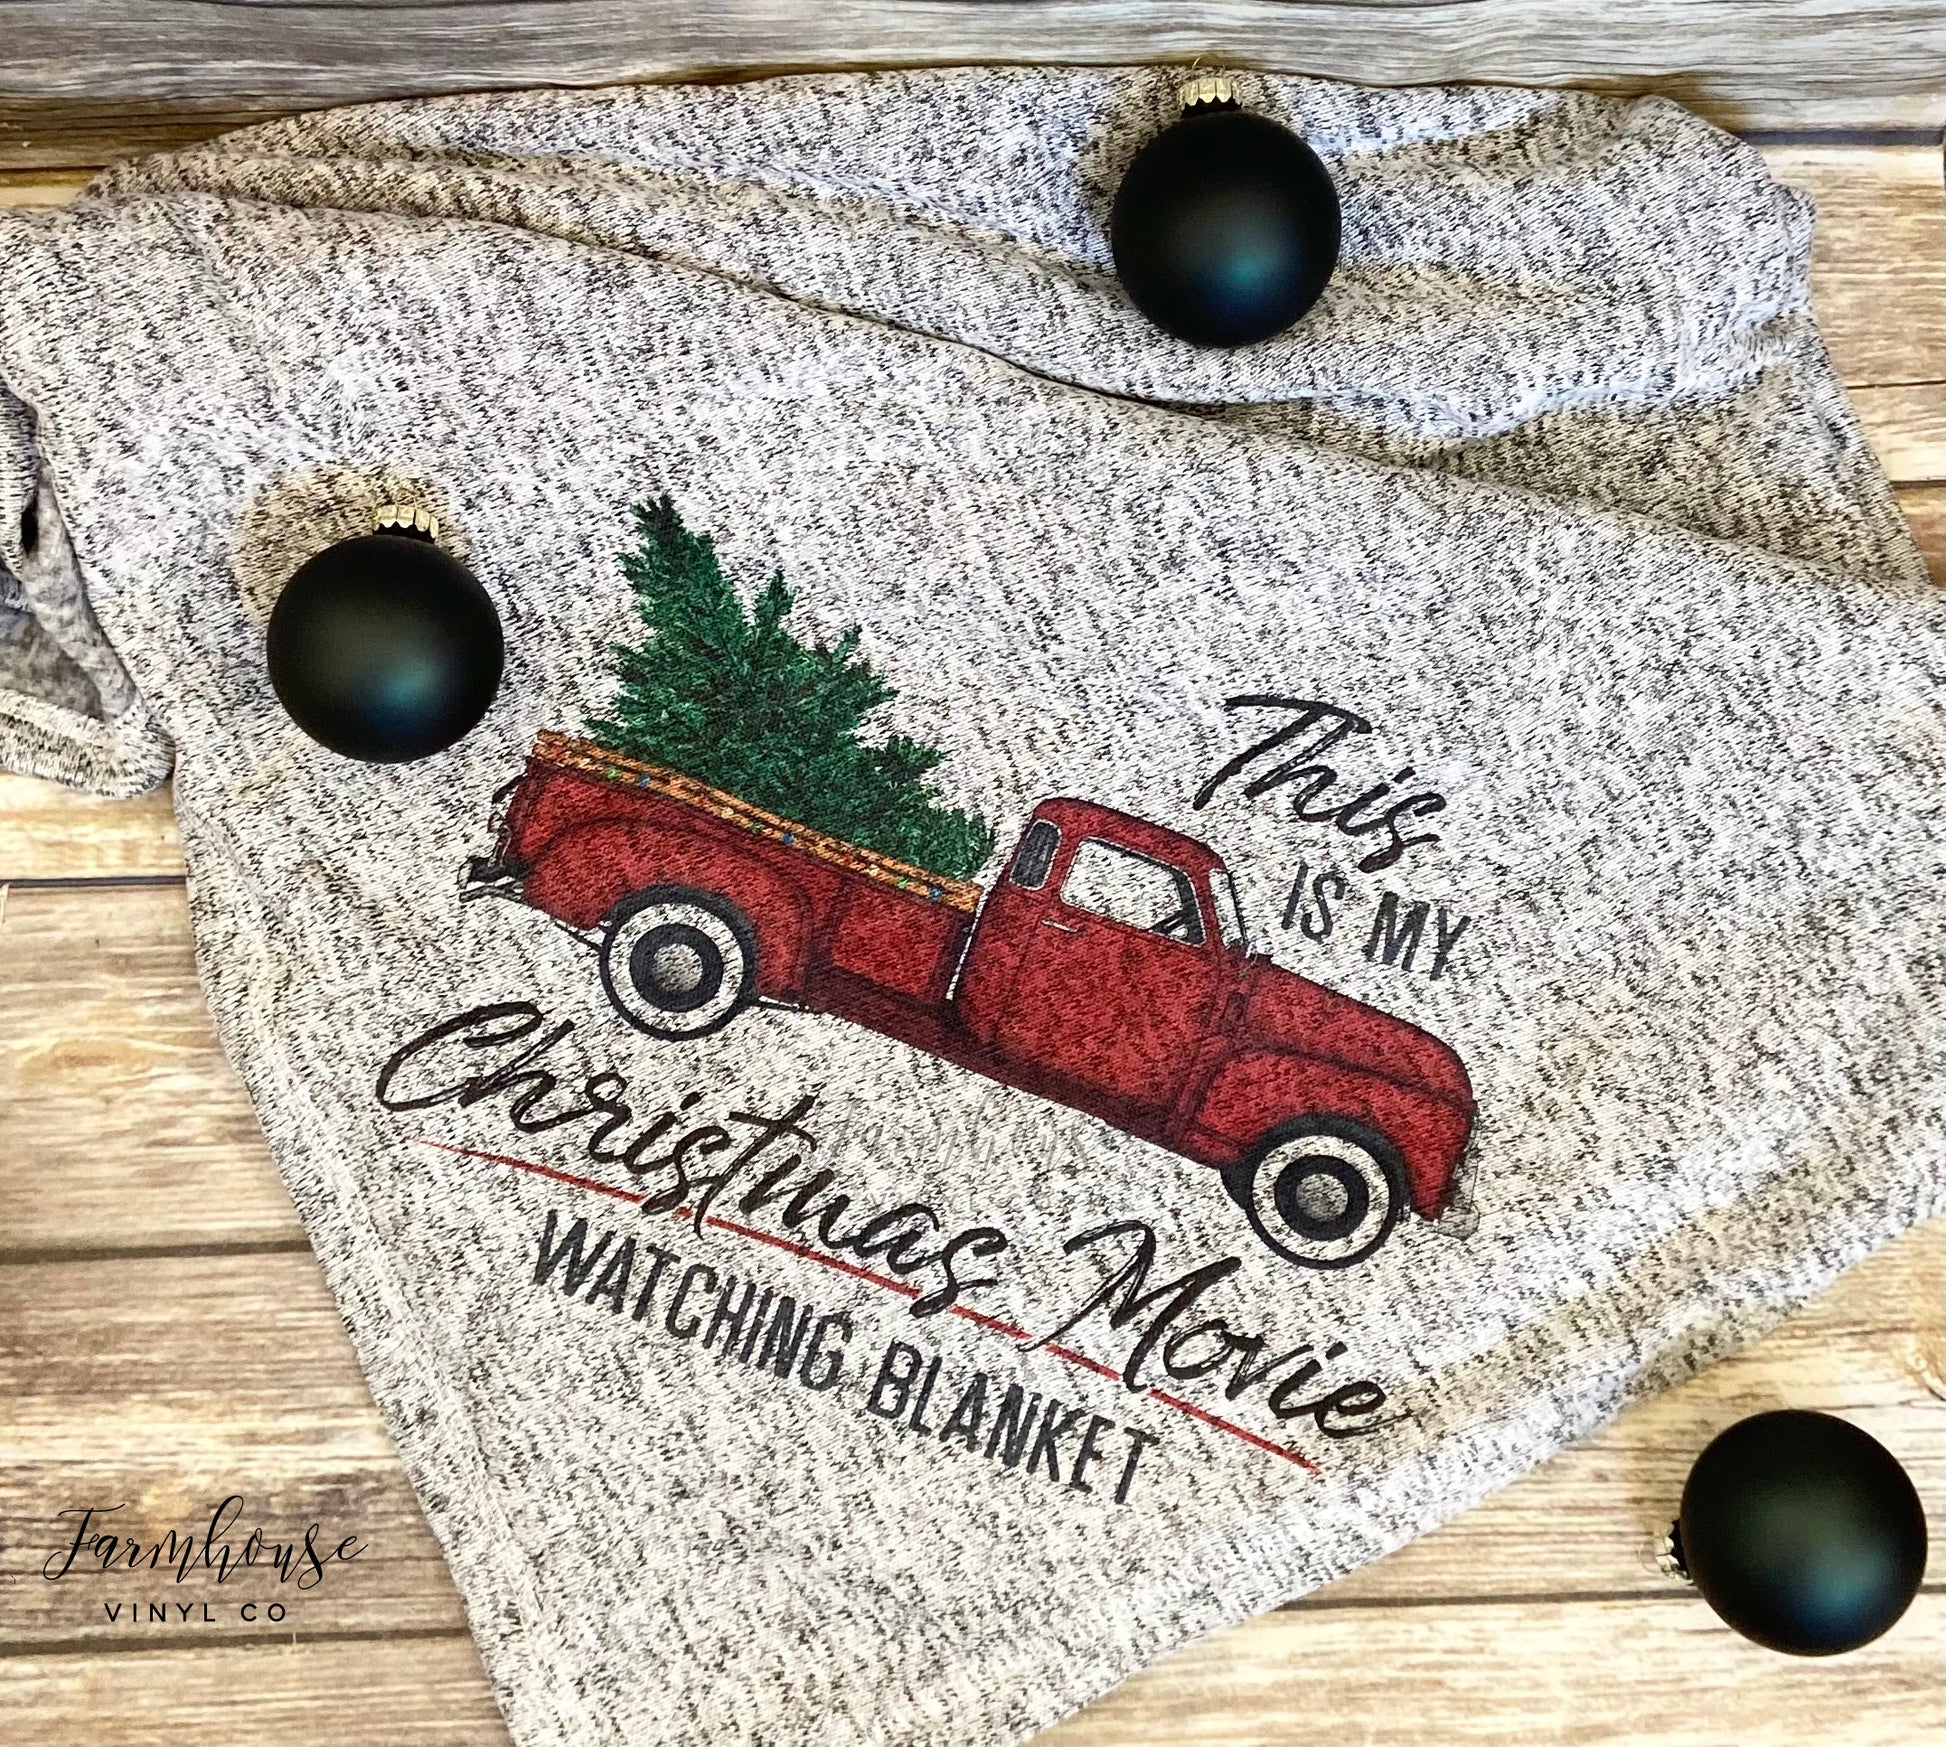 This is my Christmas Movie Watching Blanket - Farmhouse Vinyl Co